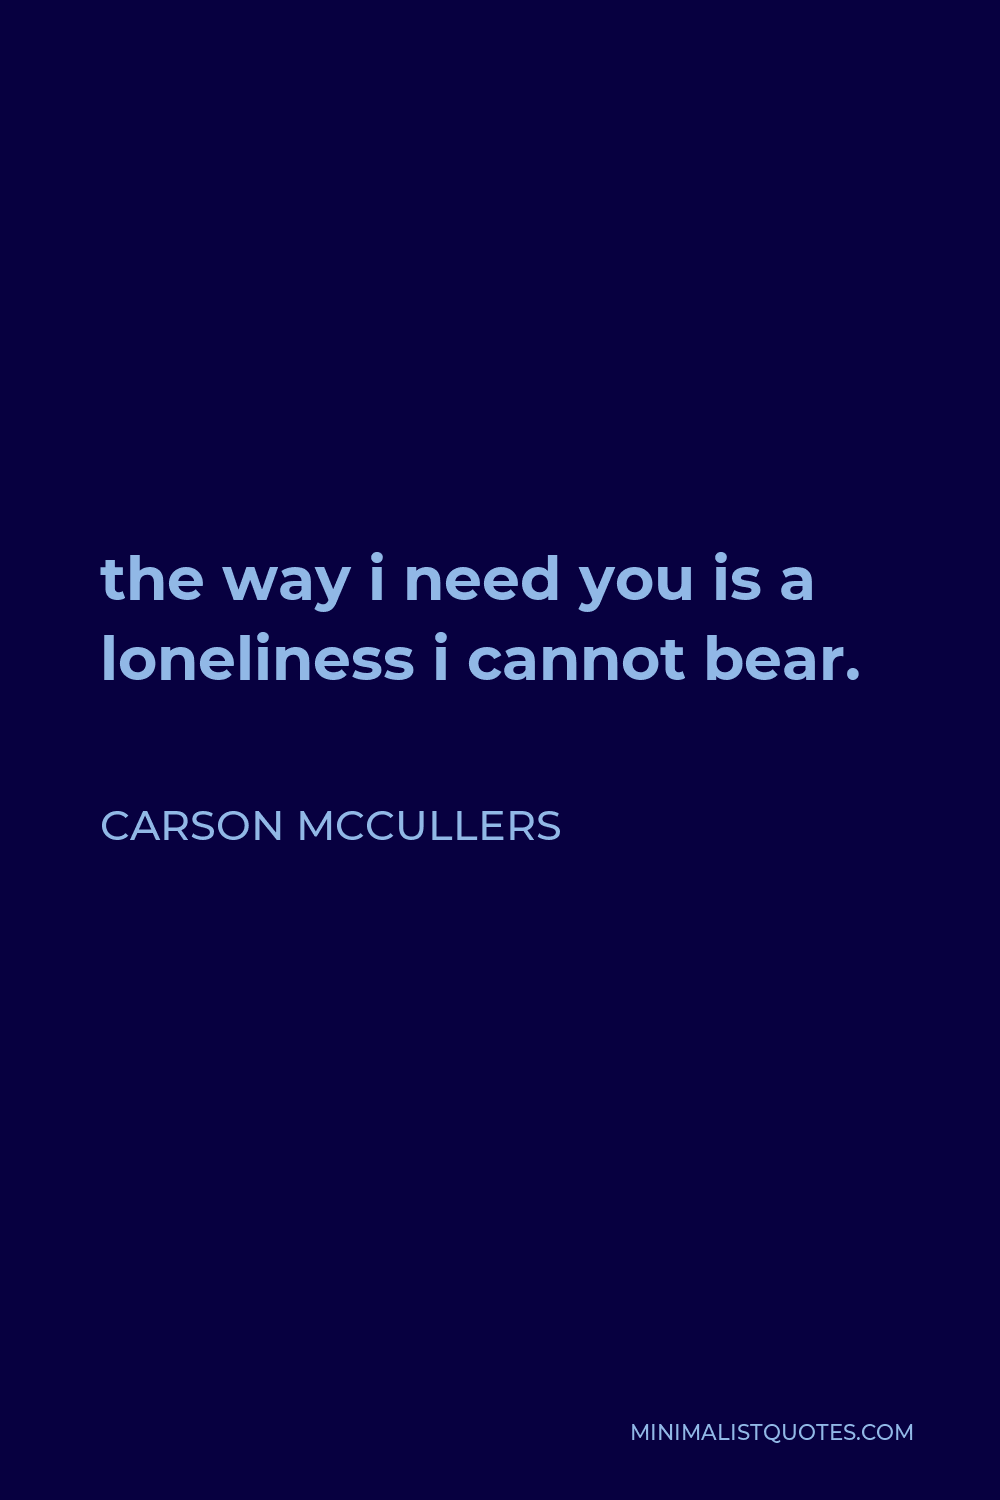 Carson McCullers Quote - the way i need you is a loneliness i cannot bear.